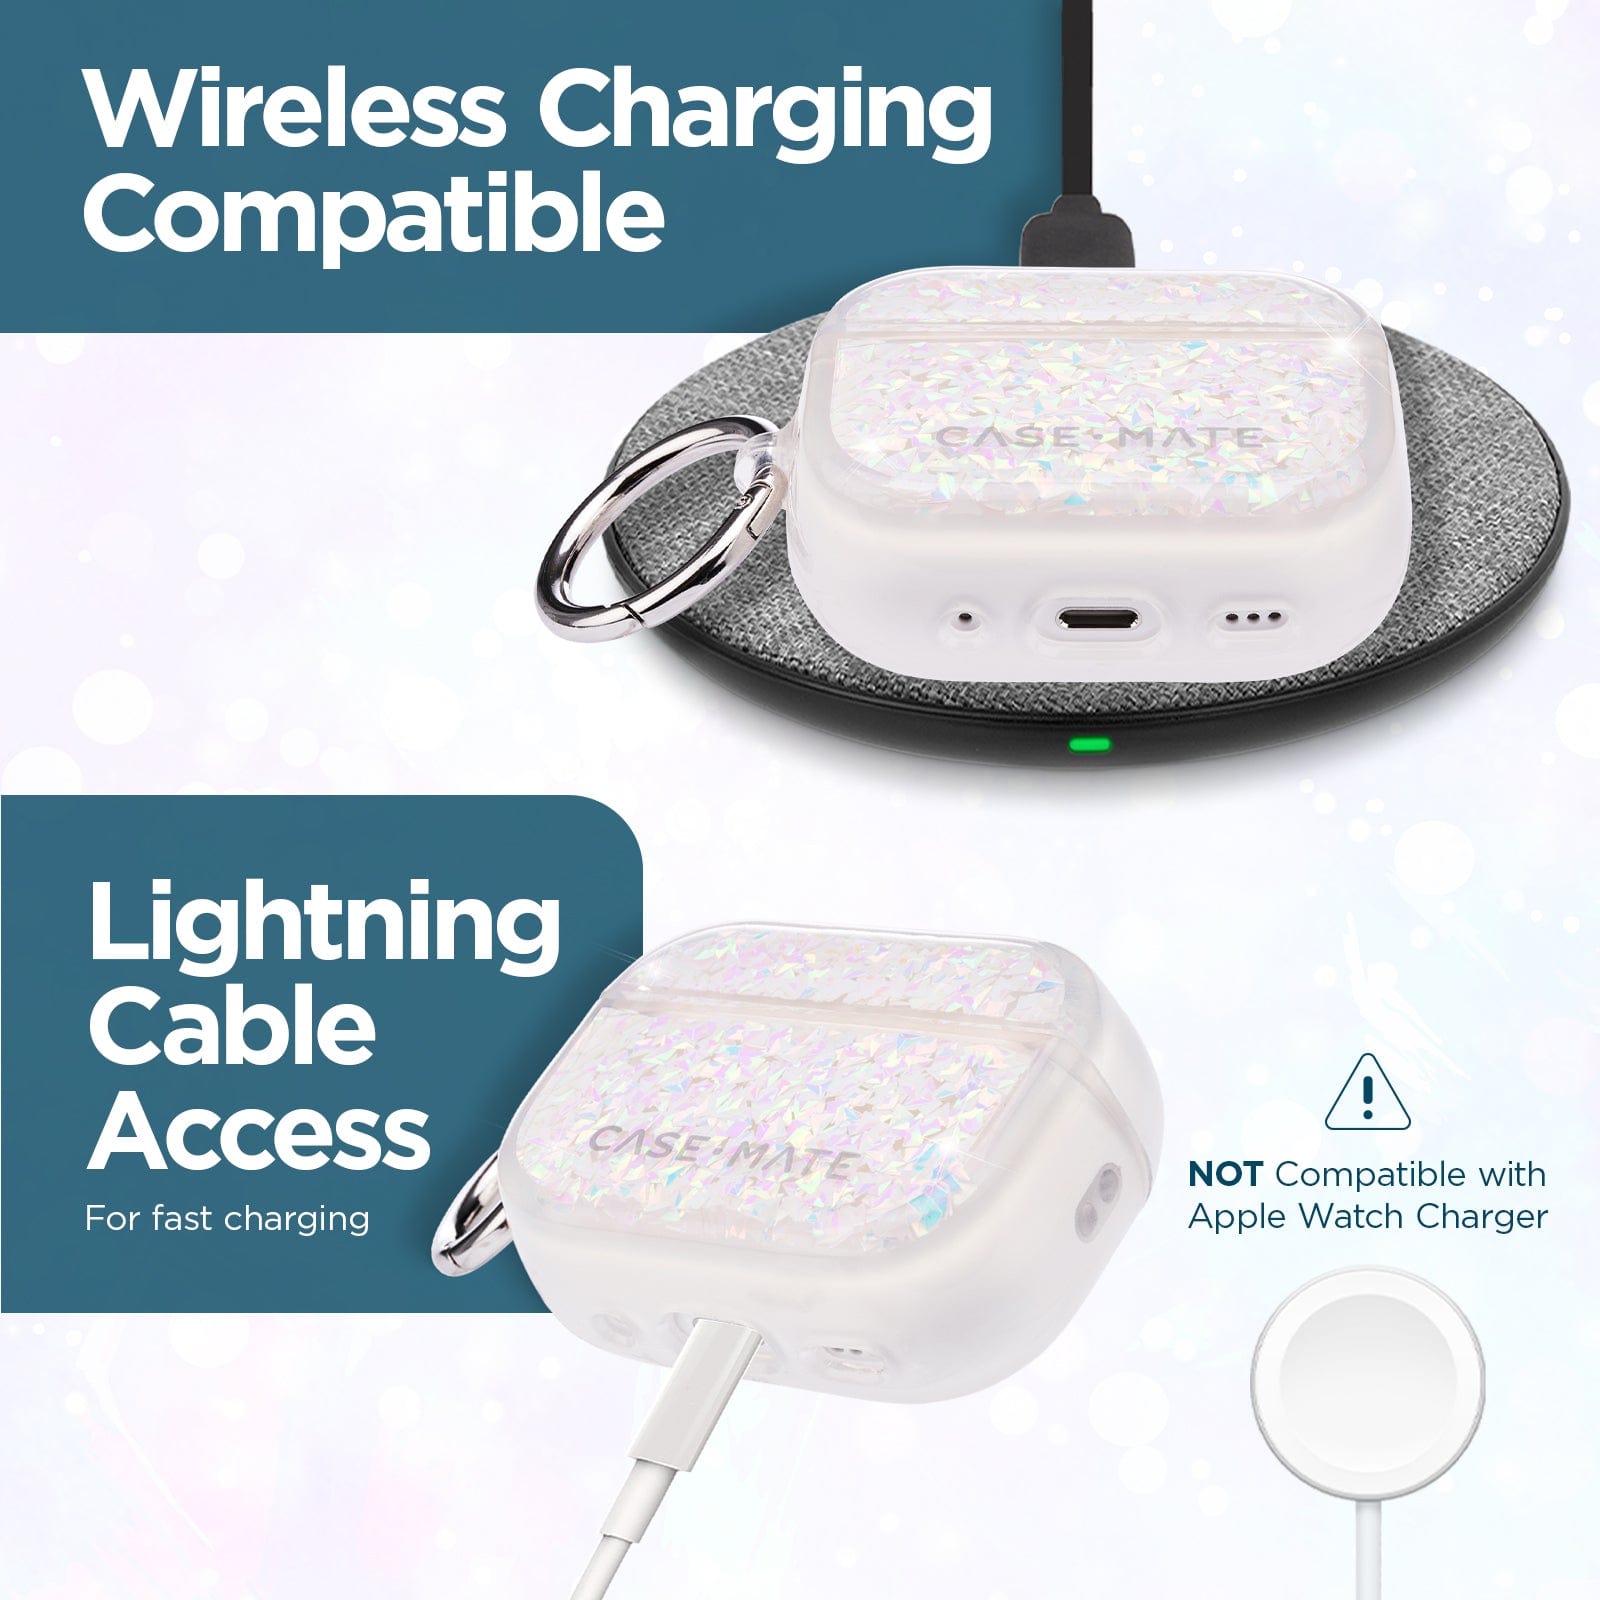 WIRELESS CHARGING COMPATIBLE. LIGHTNING CABLE ACCESS FOR FAST CHARGING. NOT COMPATIBLE WITH APPLE WATCH CHARGER.